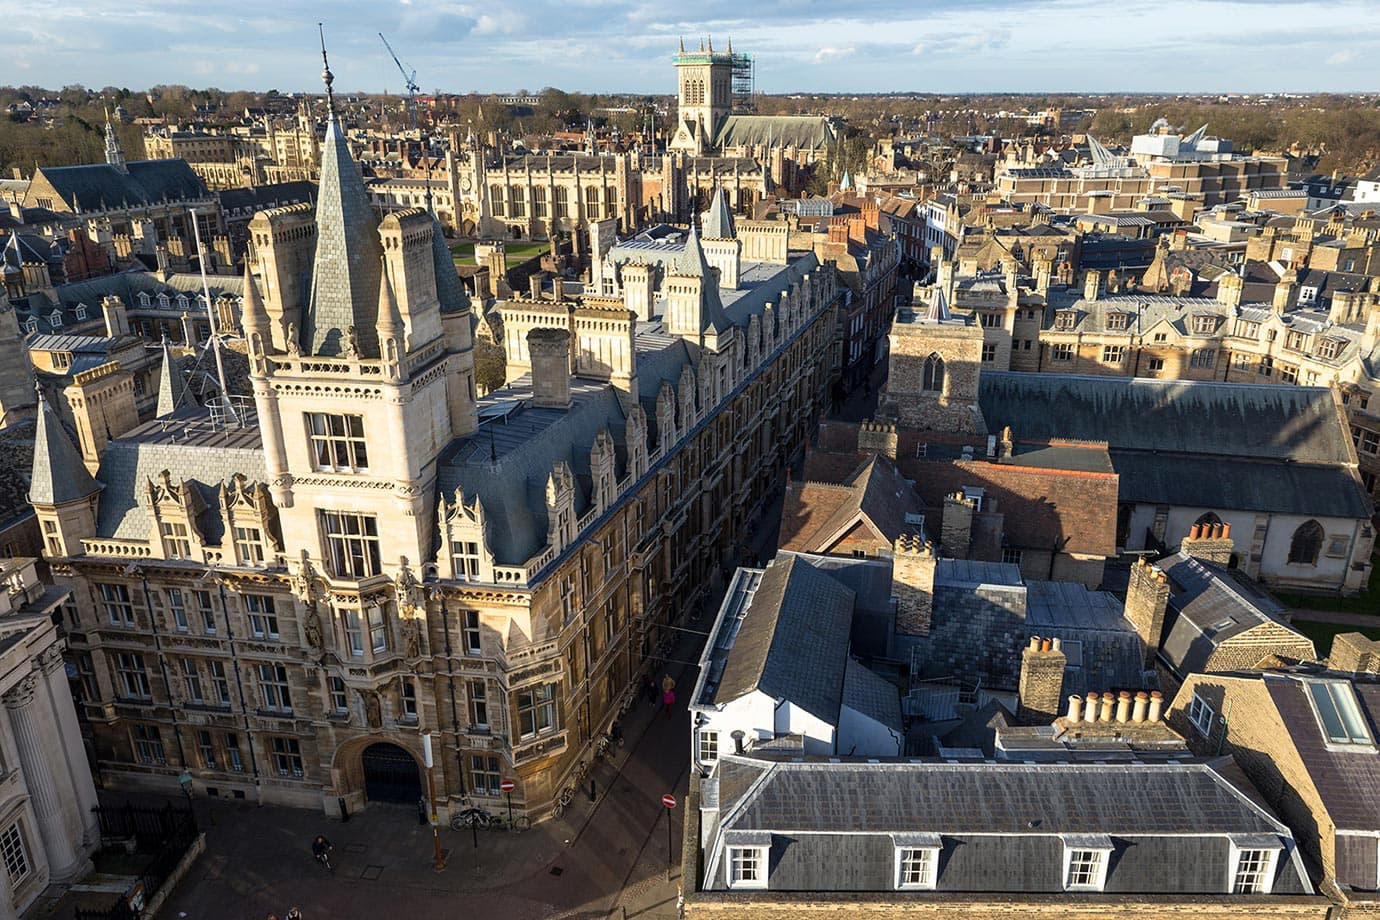 Views at St Mary's Tower, Cambridge